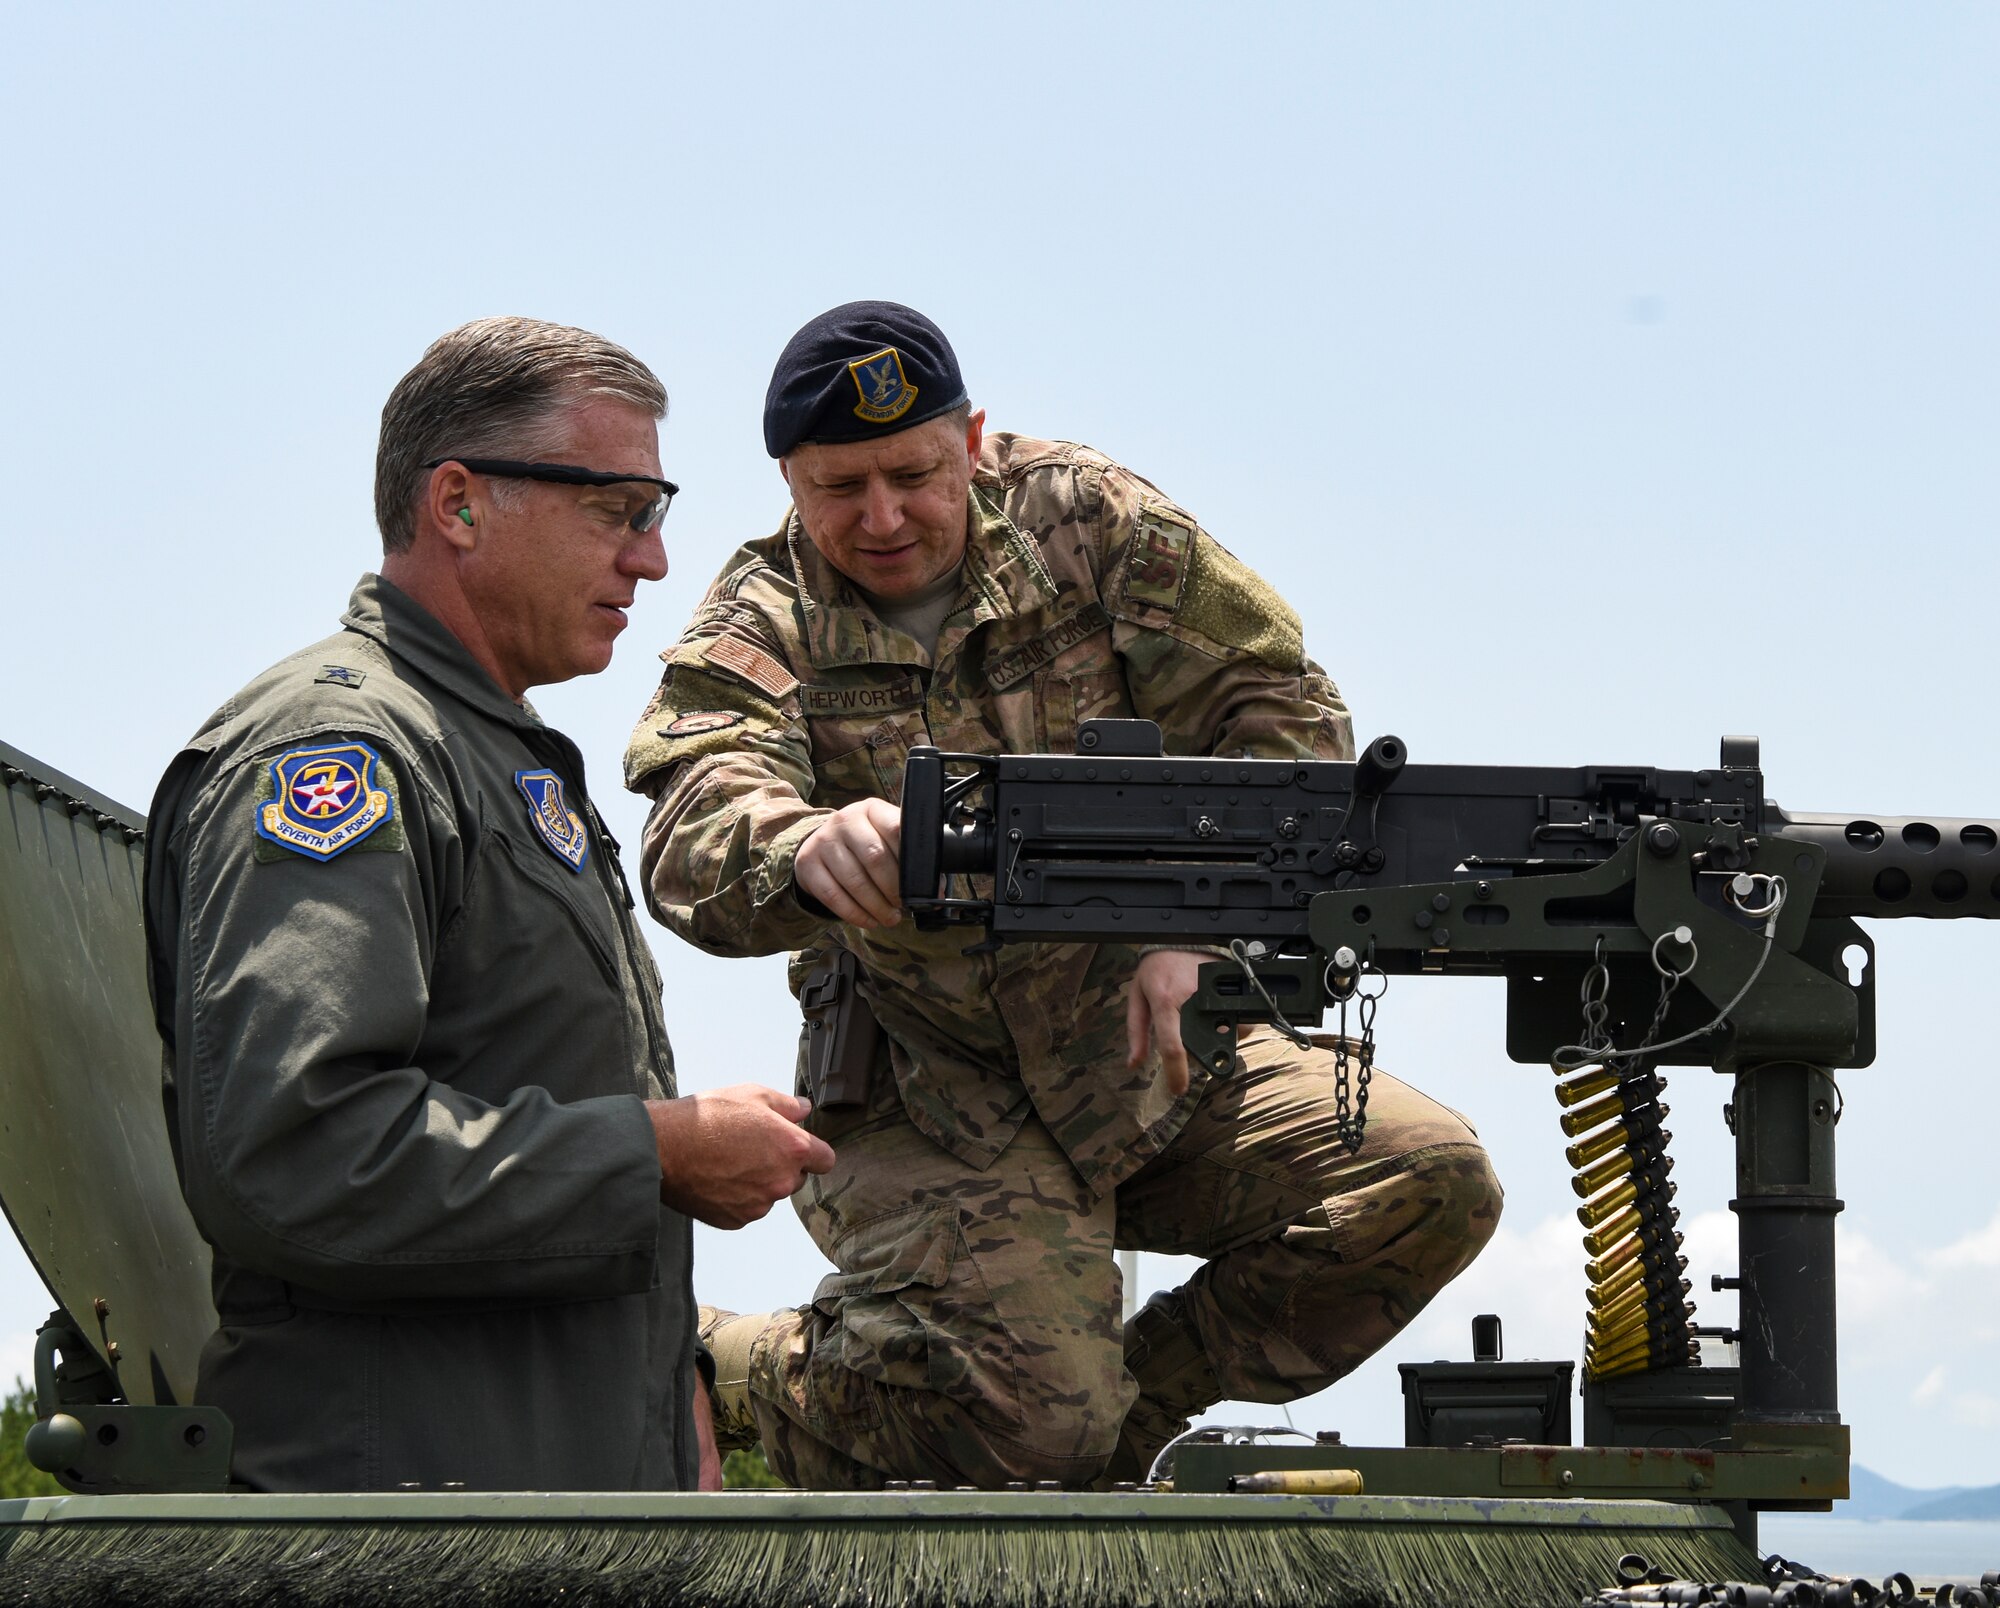 U.S. Air Force Brig. Gen. David Eaglin (left), 7th Air Force vice commander, receives instructions from Staff Sgt. Jared Hepworth, 8th Security Forces Squadron member, during an immersion tour at Kunsan Air Base, Republic of Korea, July 12, 2019. Eaglin had the opportunity to sample some of the weaponry the 8th SFS uses to defend the base. (U.S. Air Force photo by Staff Sgt. Joshua Edwards)